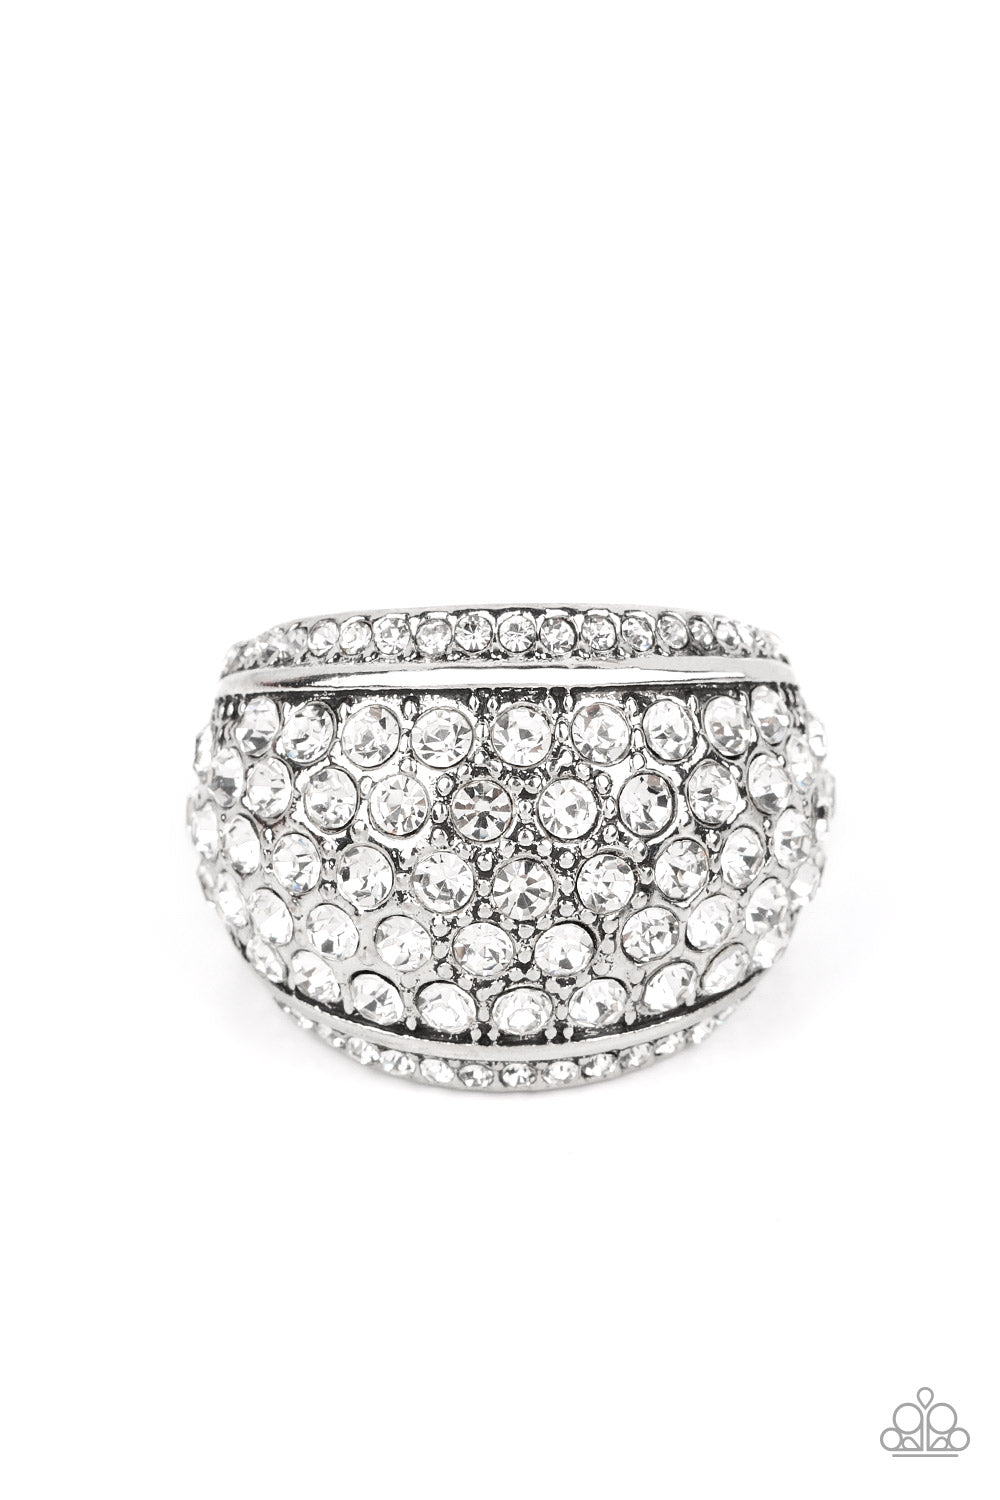 Running OFF SPARKLE - white - Paparazzi ring